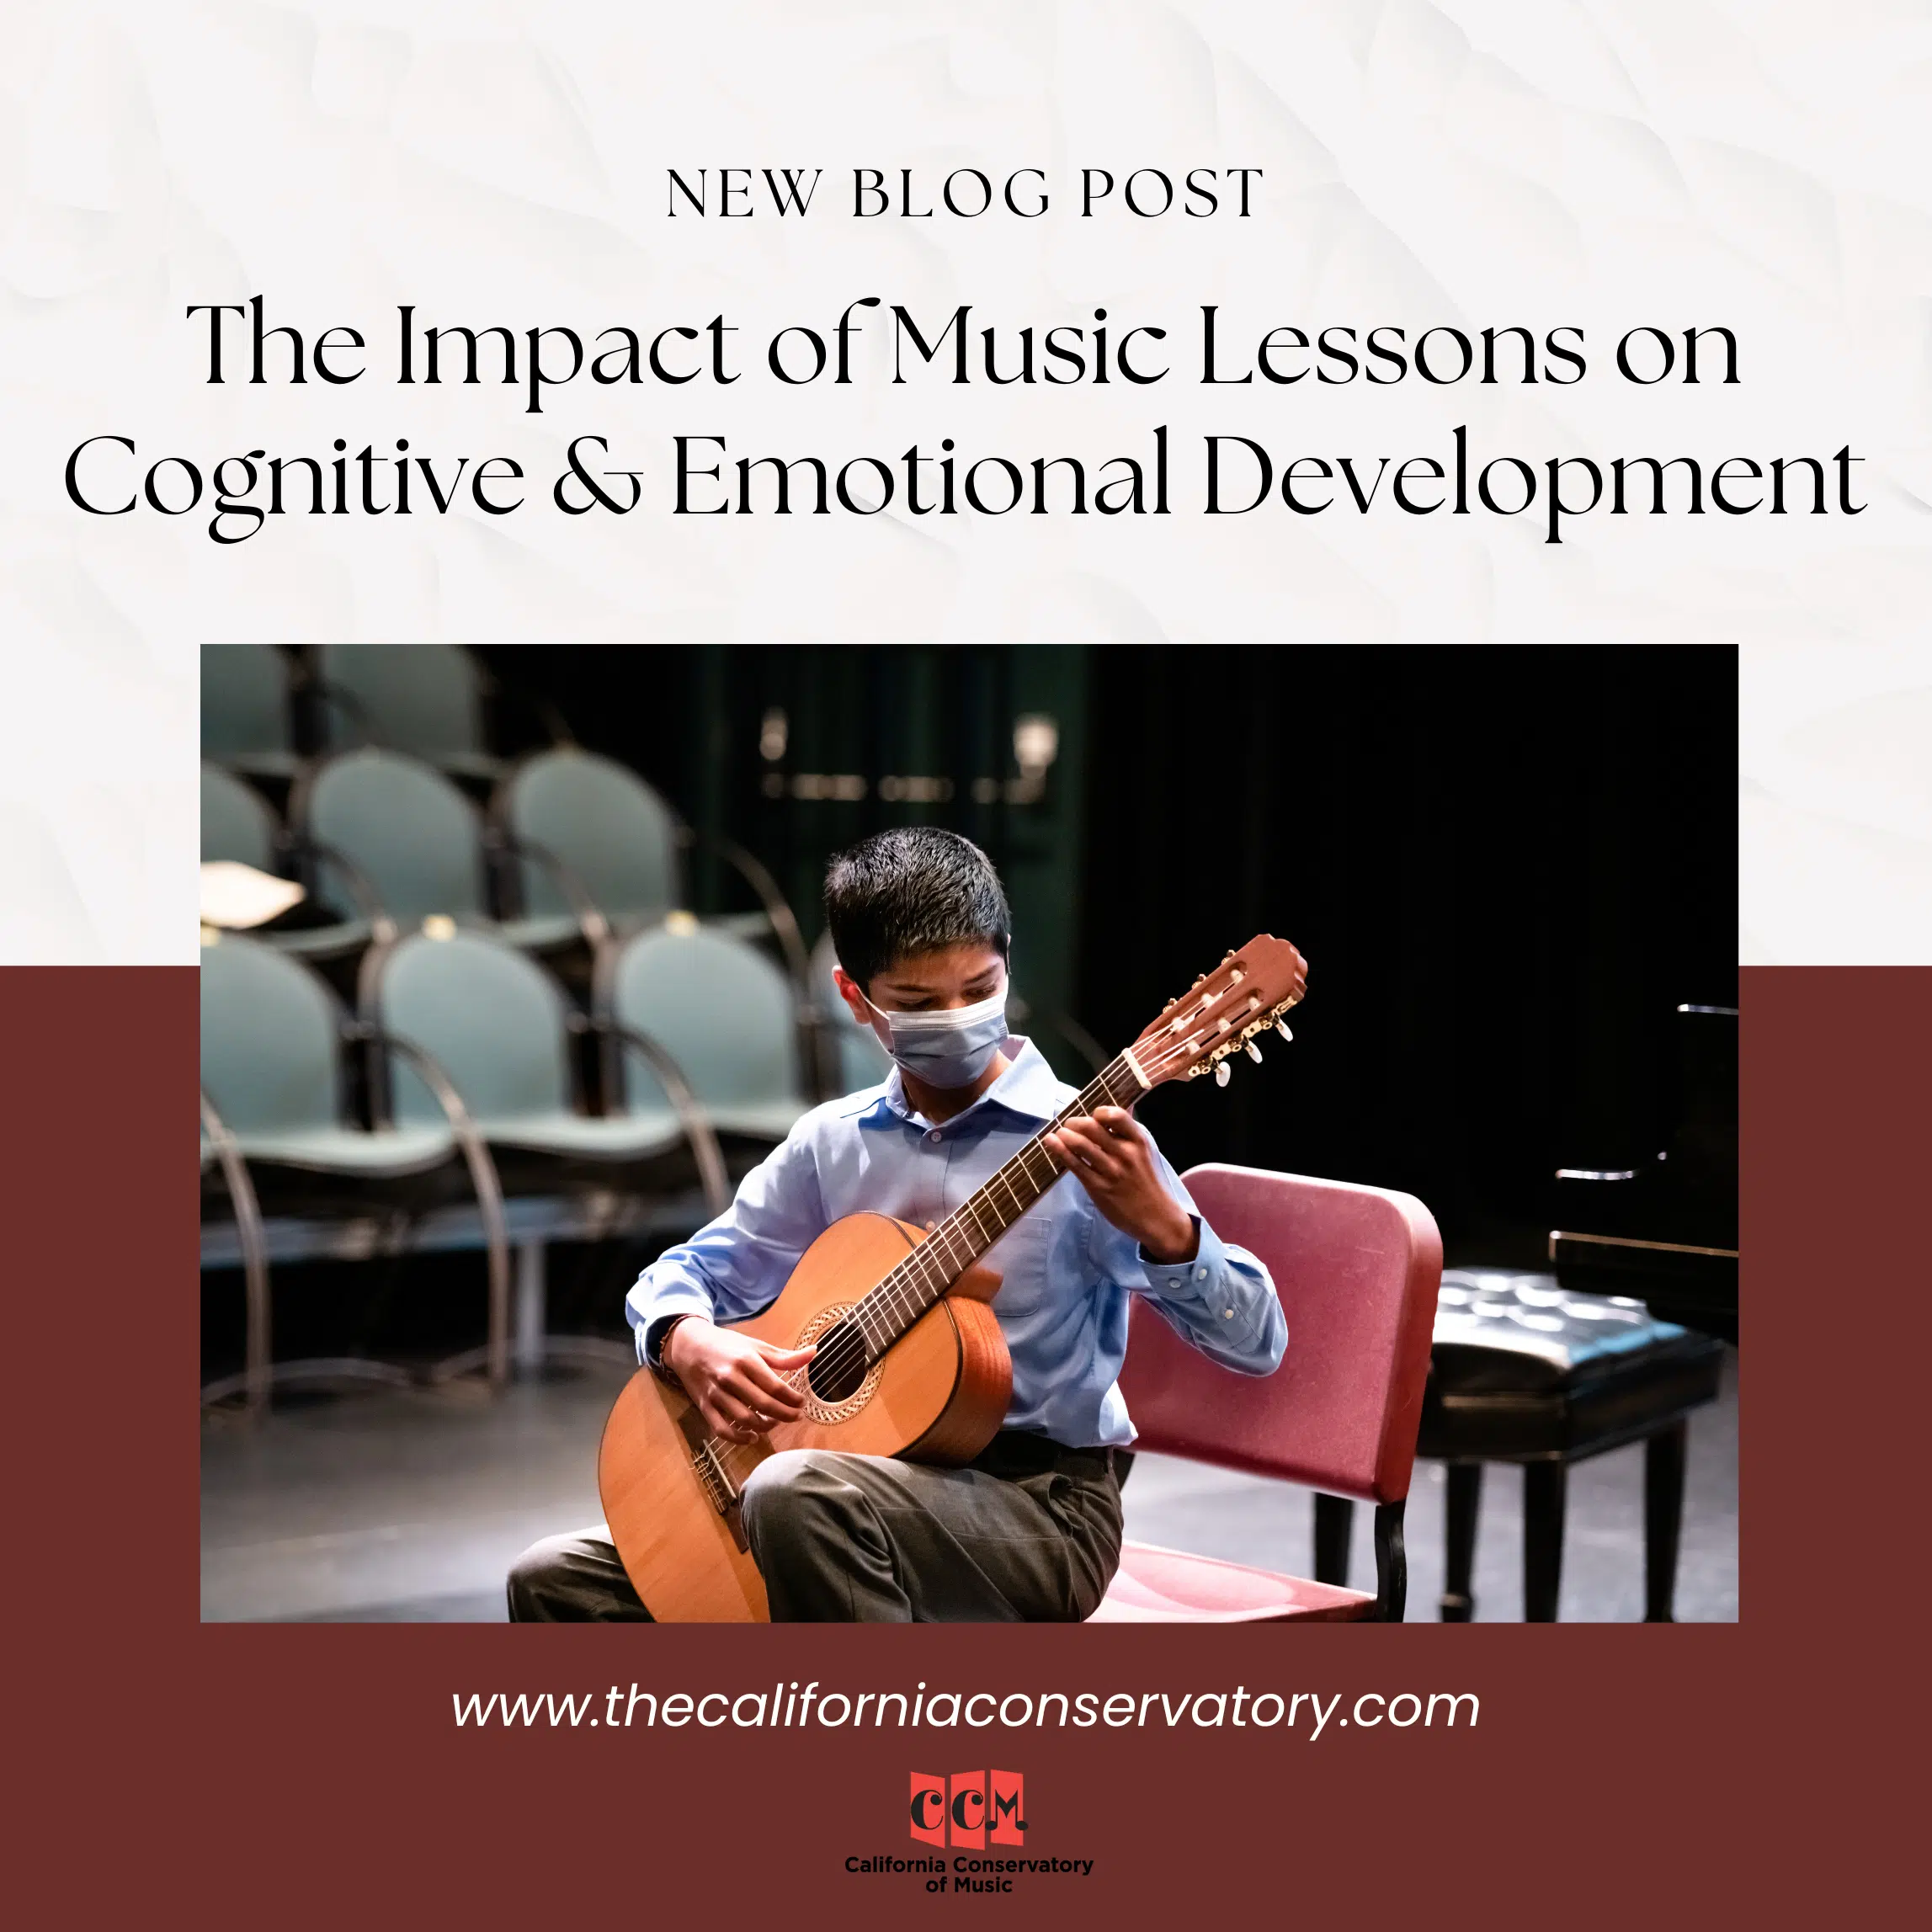 The Impact of Music Lessons Blog Post Title